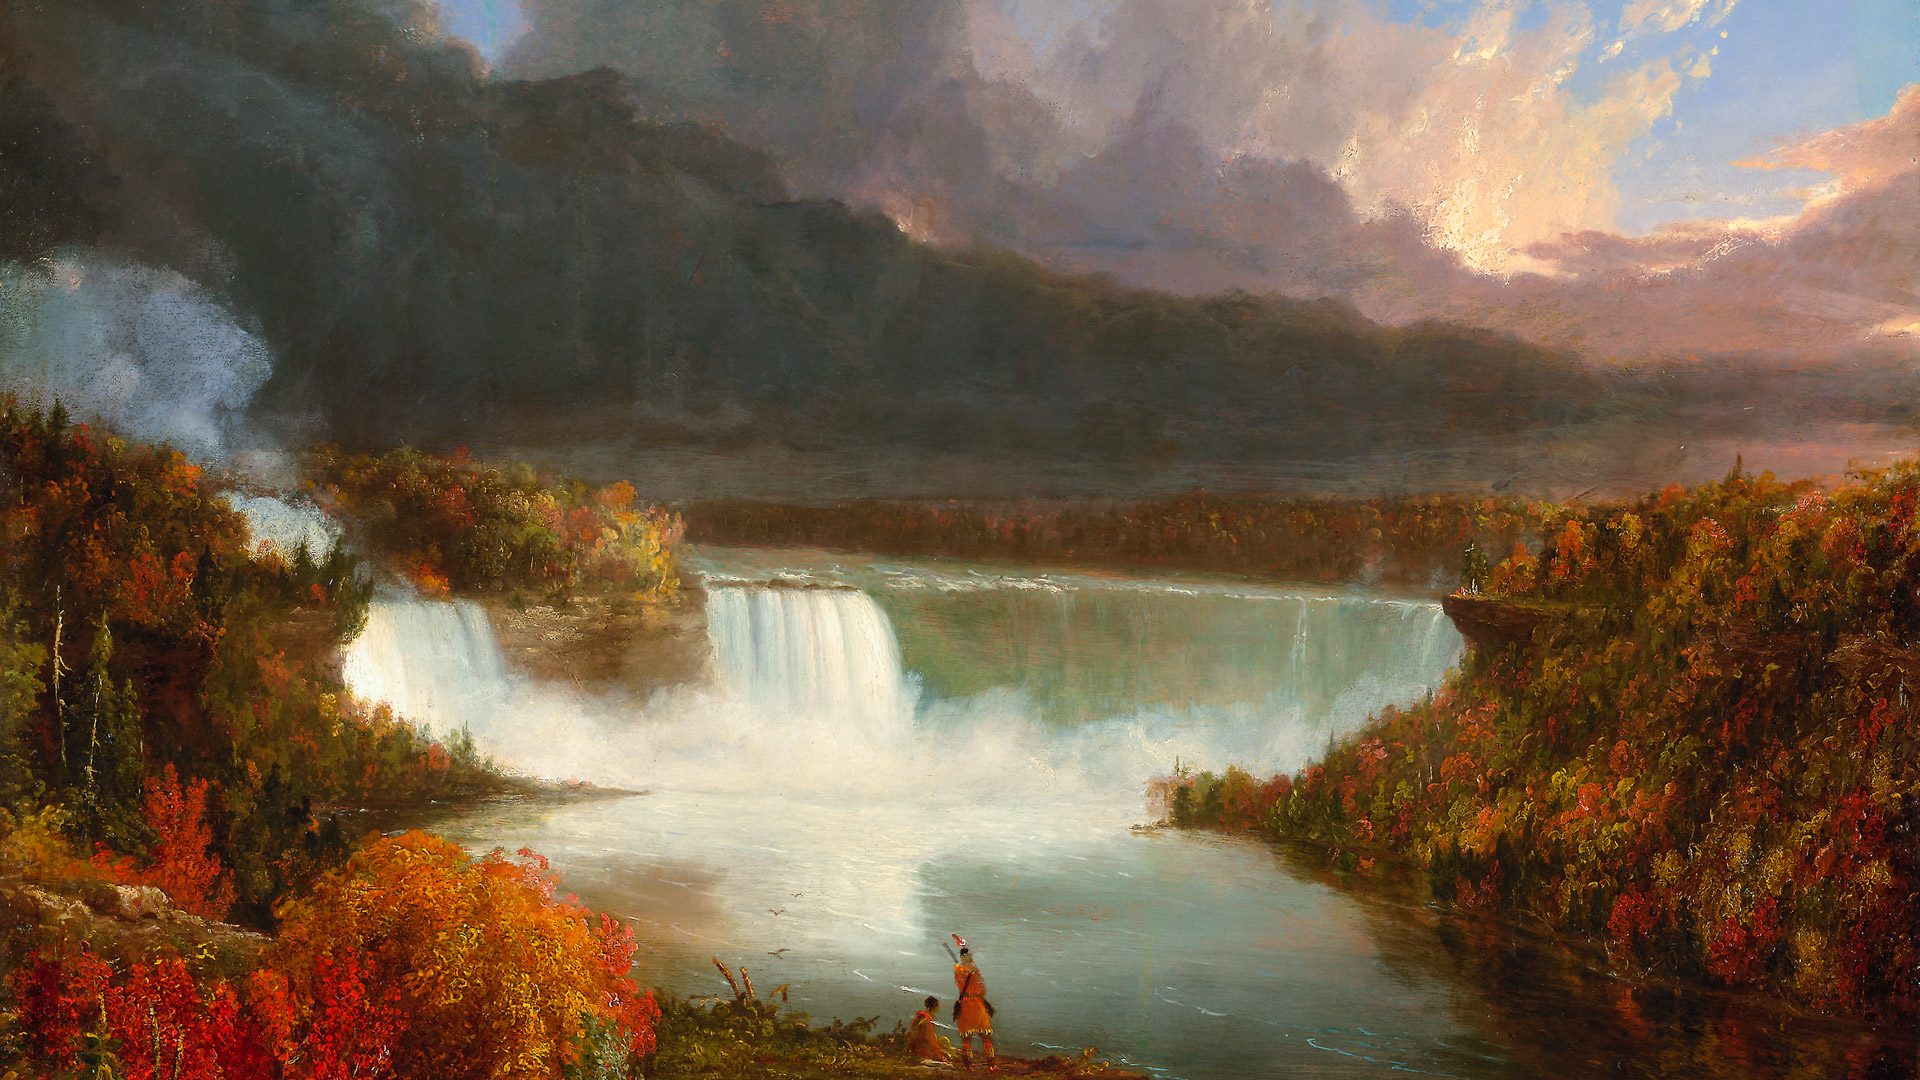 Bring the beauty of the seasons to your desktop with our nature wallpaper featuring the majestic Niagara Falls in autumn, and let your screen become a portal to the awe-inspiring power of nature.